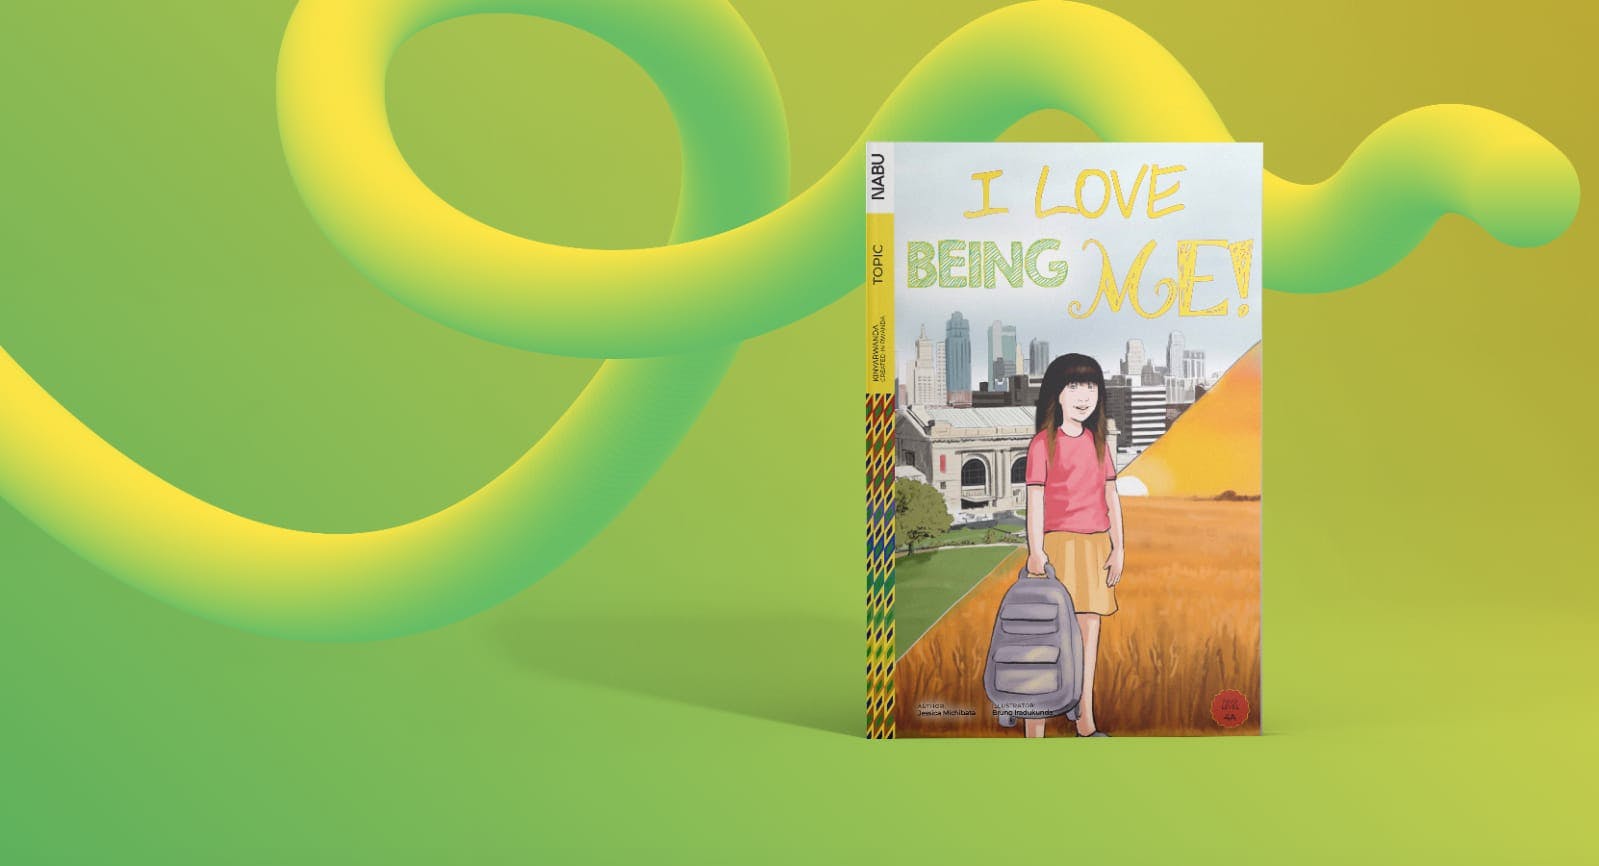 NABU Publishes “I Love Being Me!” A must read story for every child about belonging and self love.